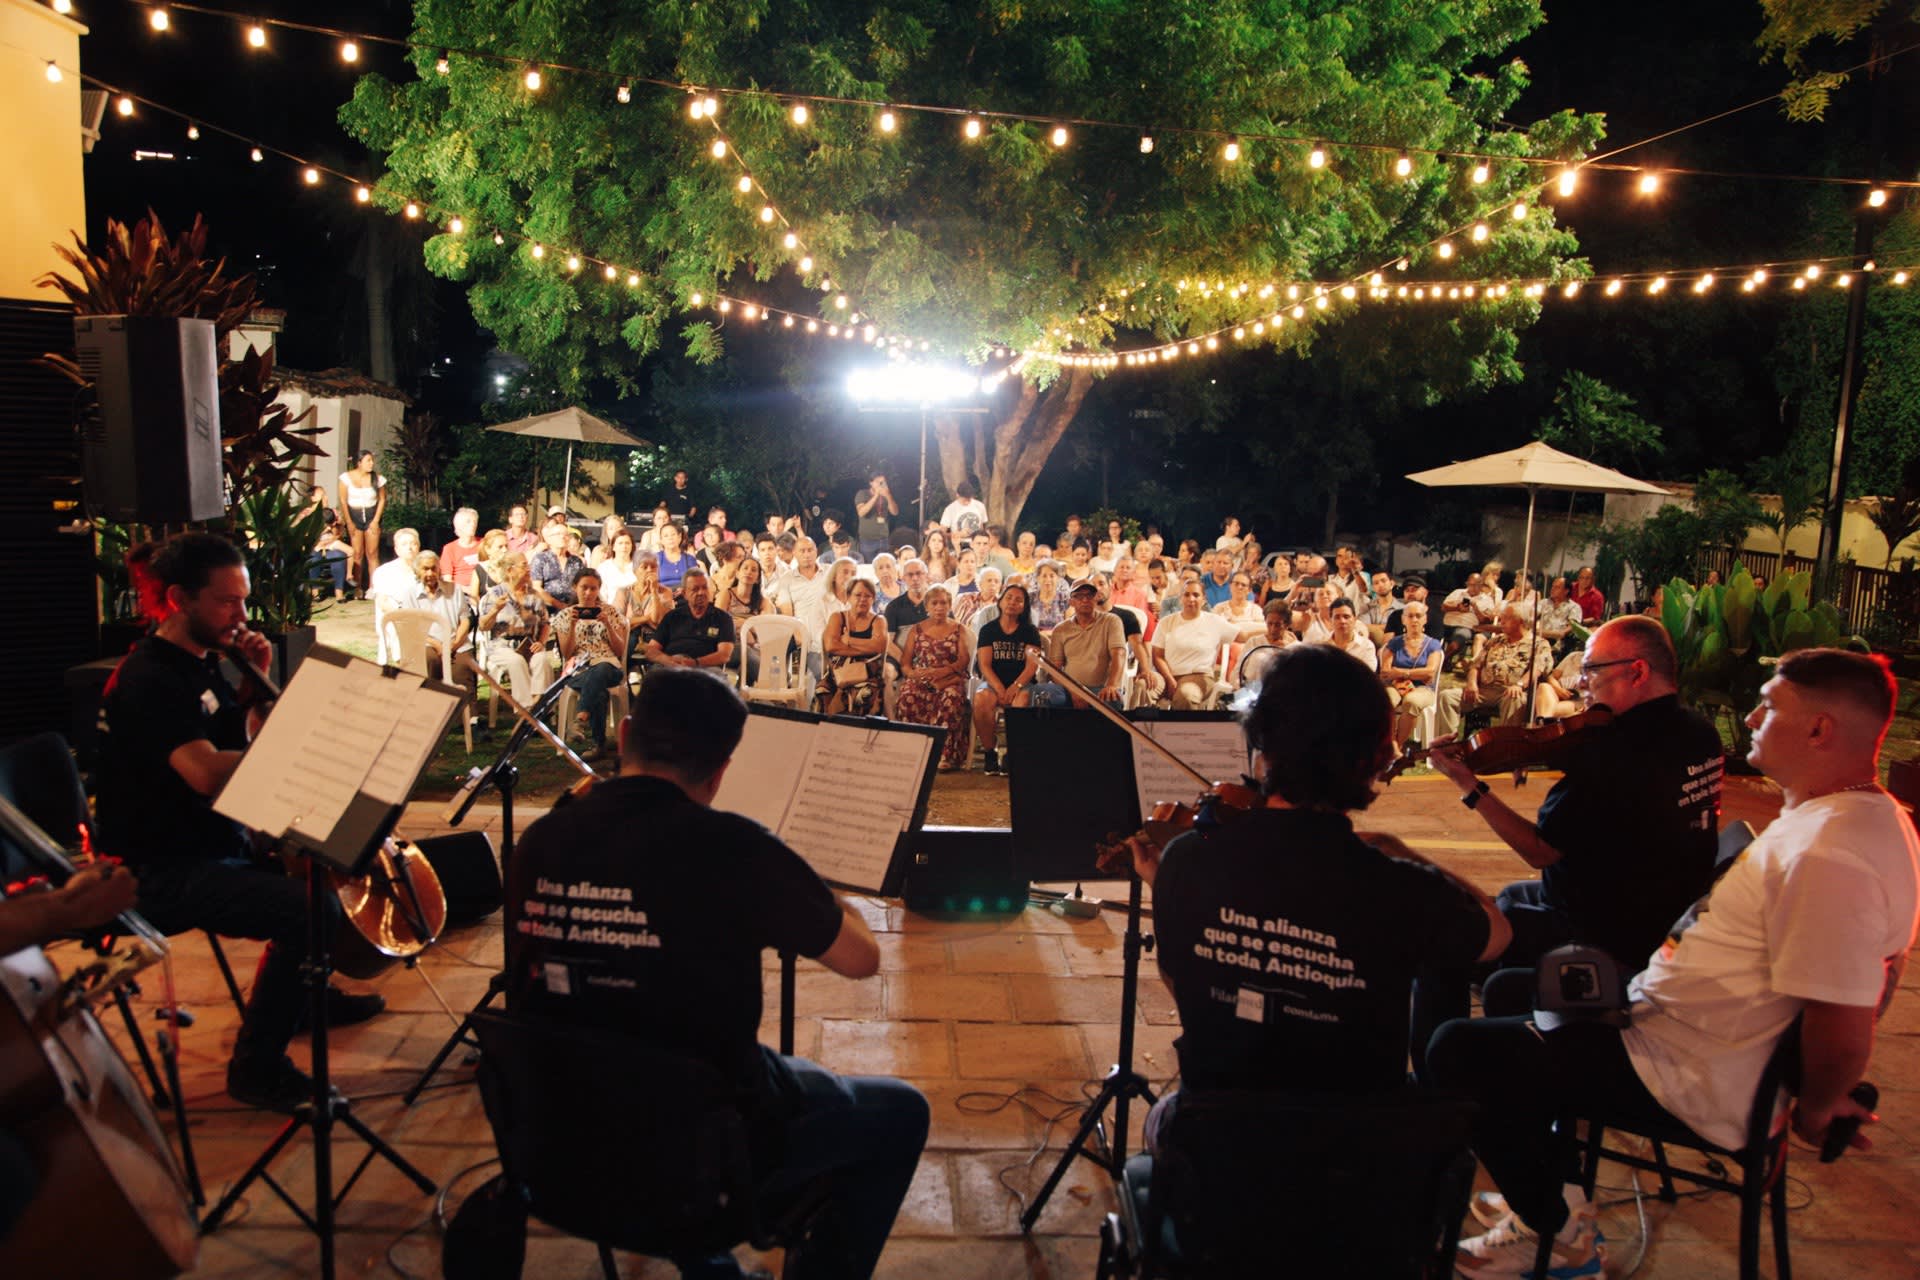 Photograph of a free outdoor symphonic music concert by FILARMED.